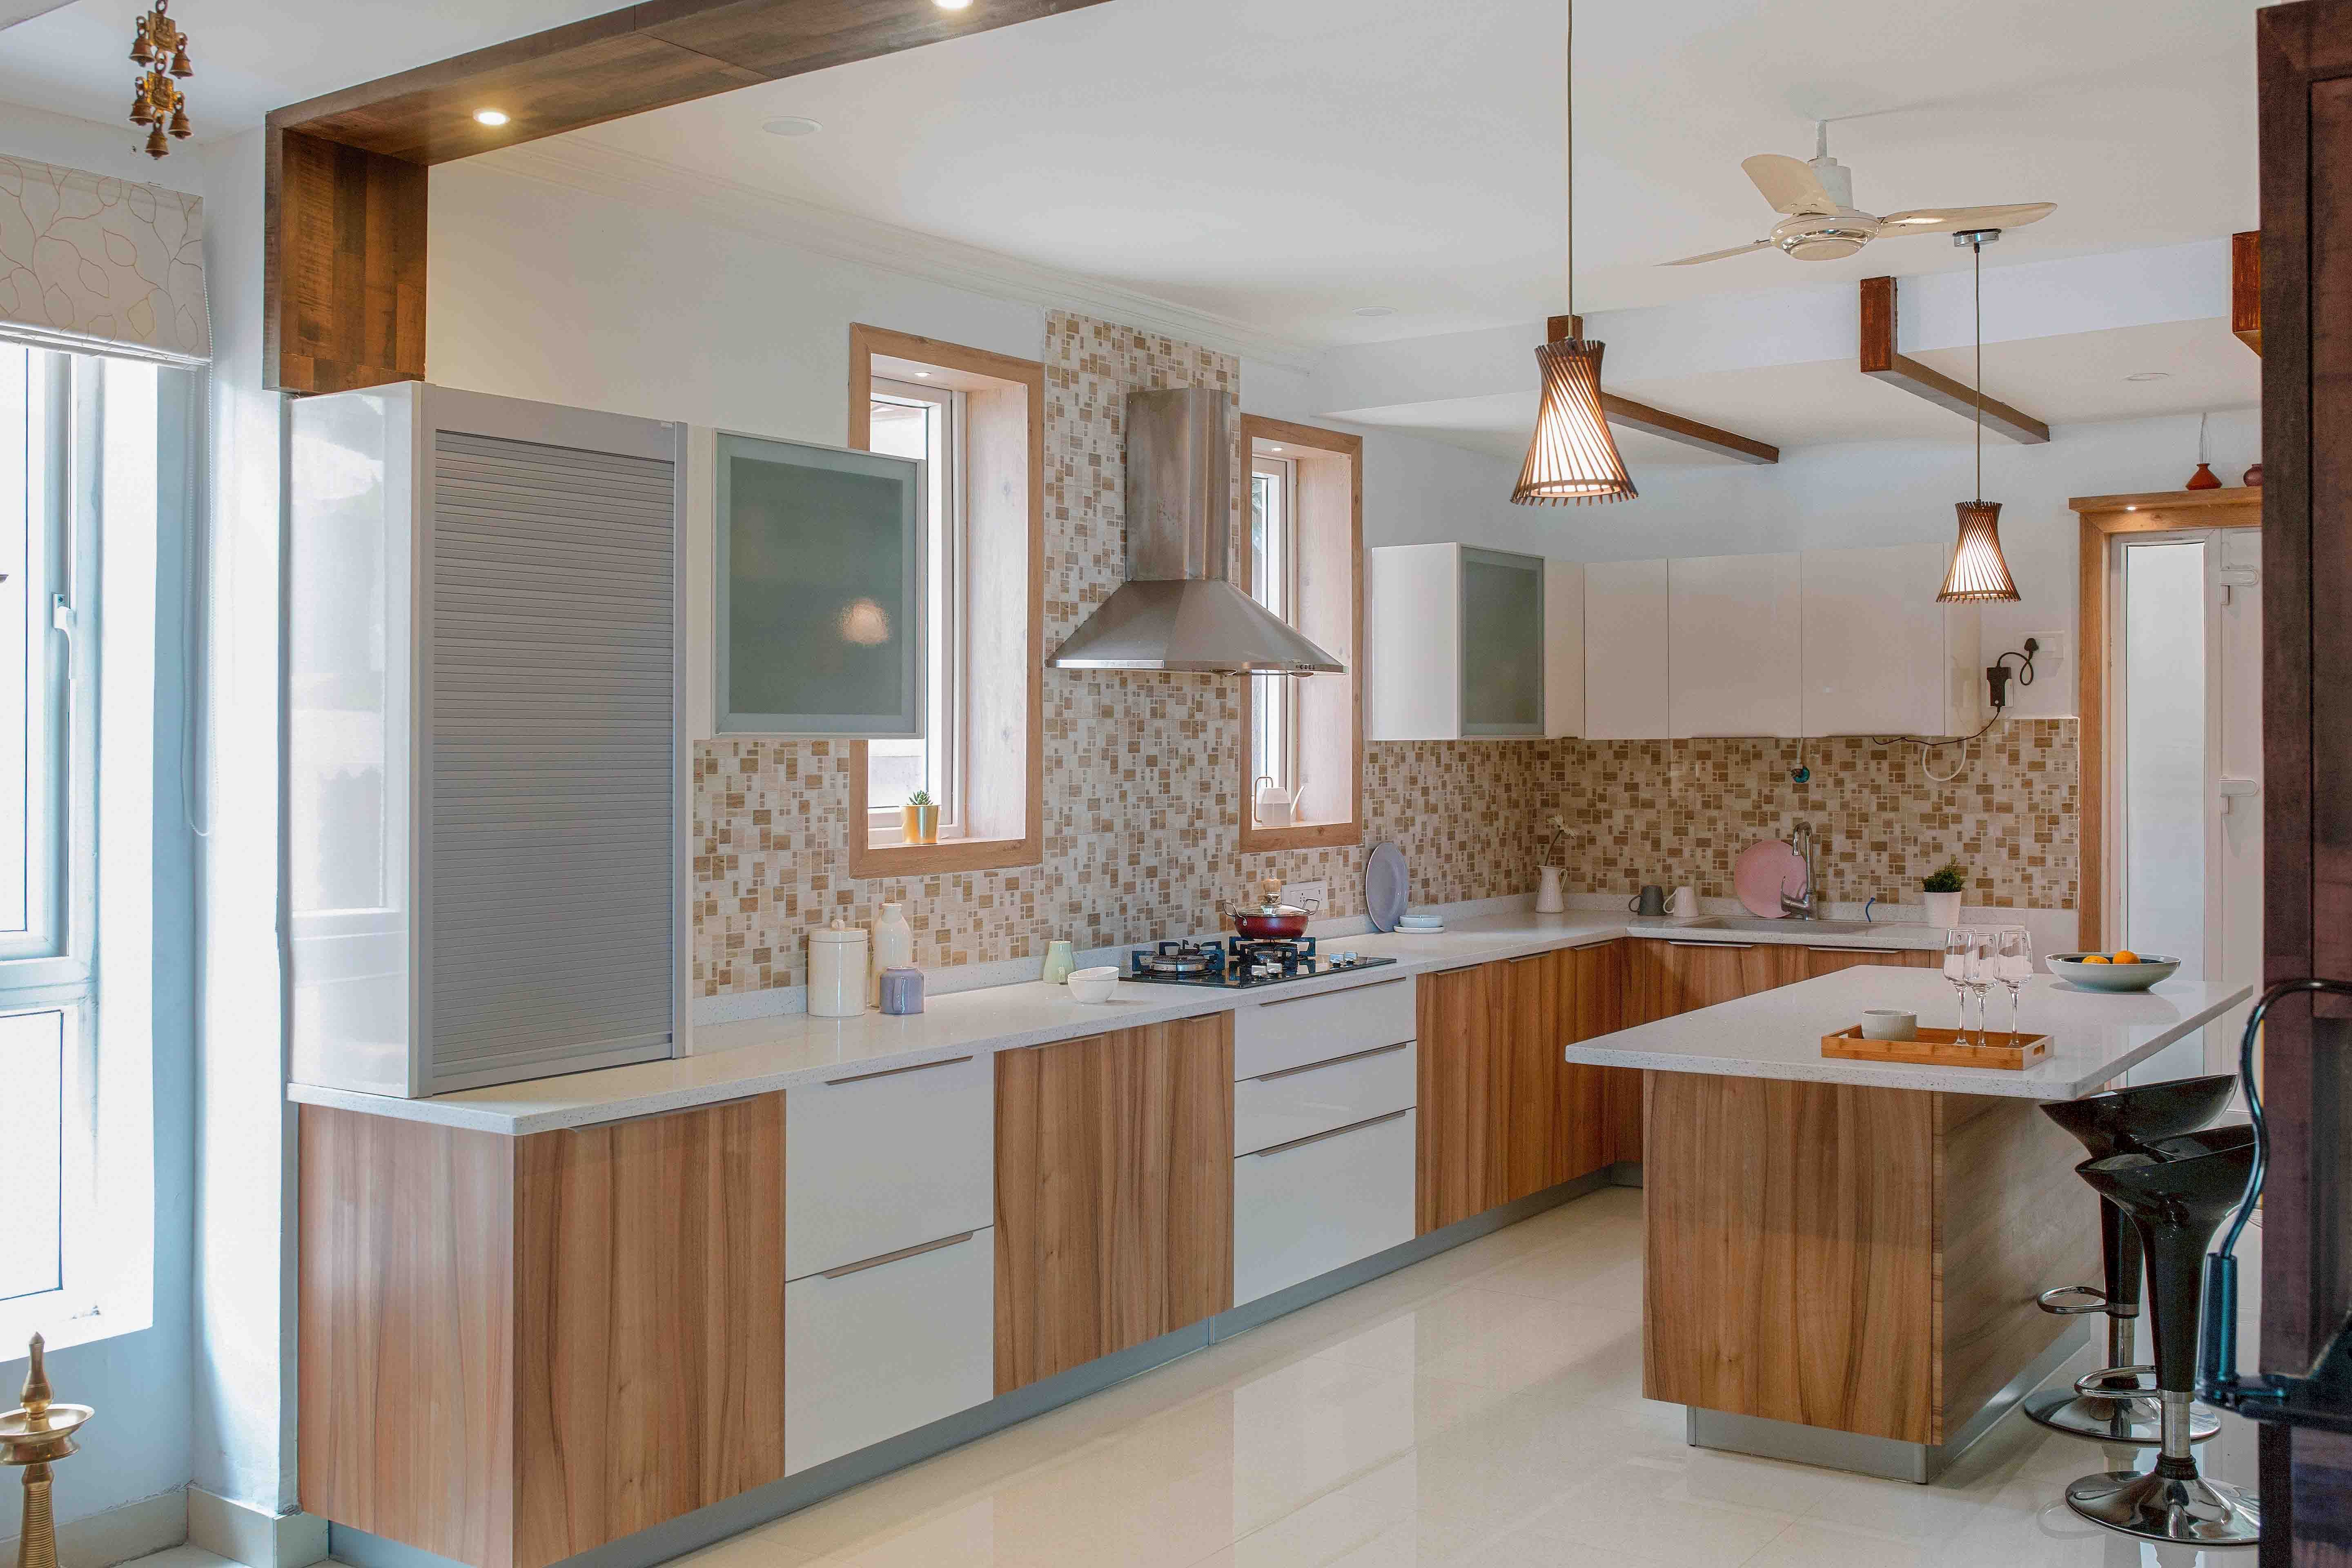 Classic Modular Island Kitchen Design With Wood And White Cabinets